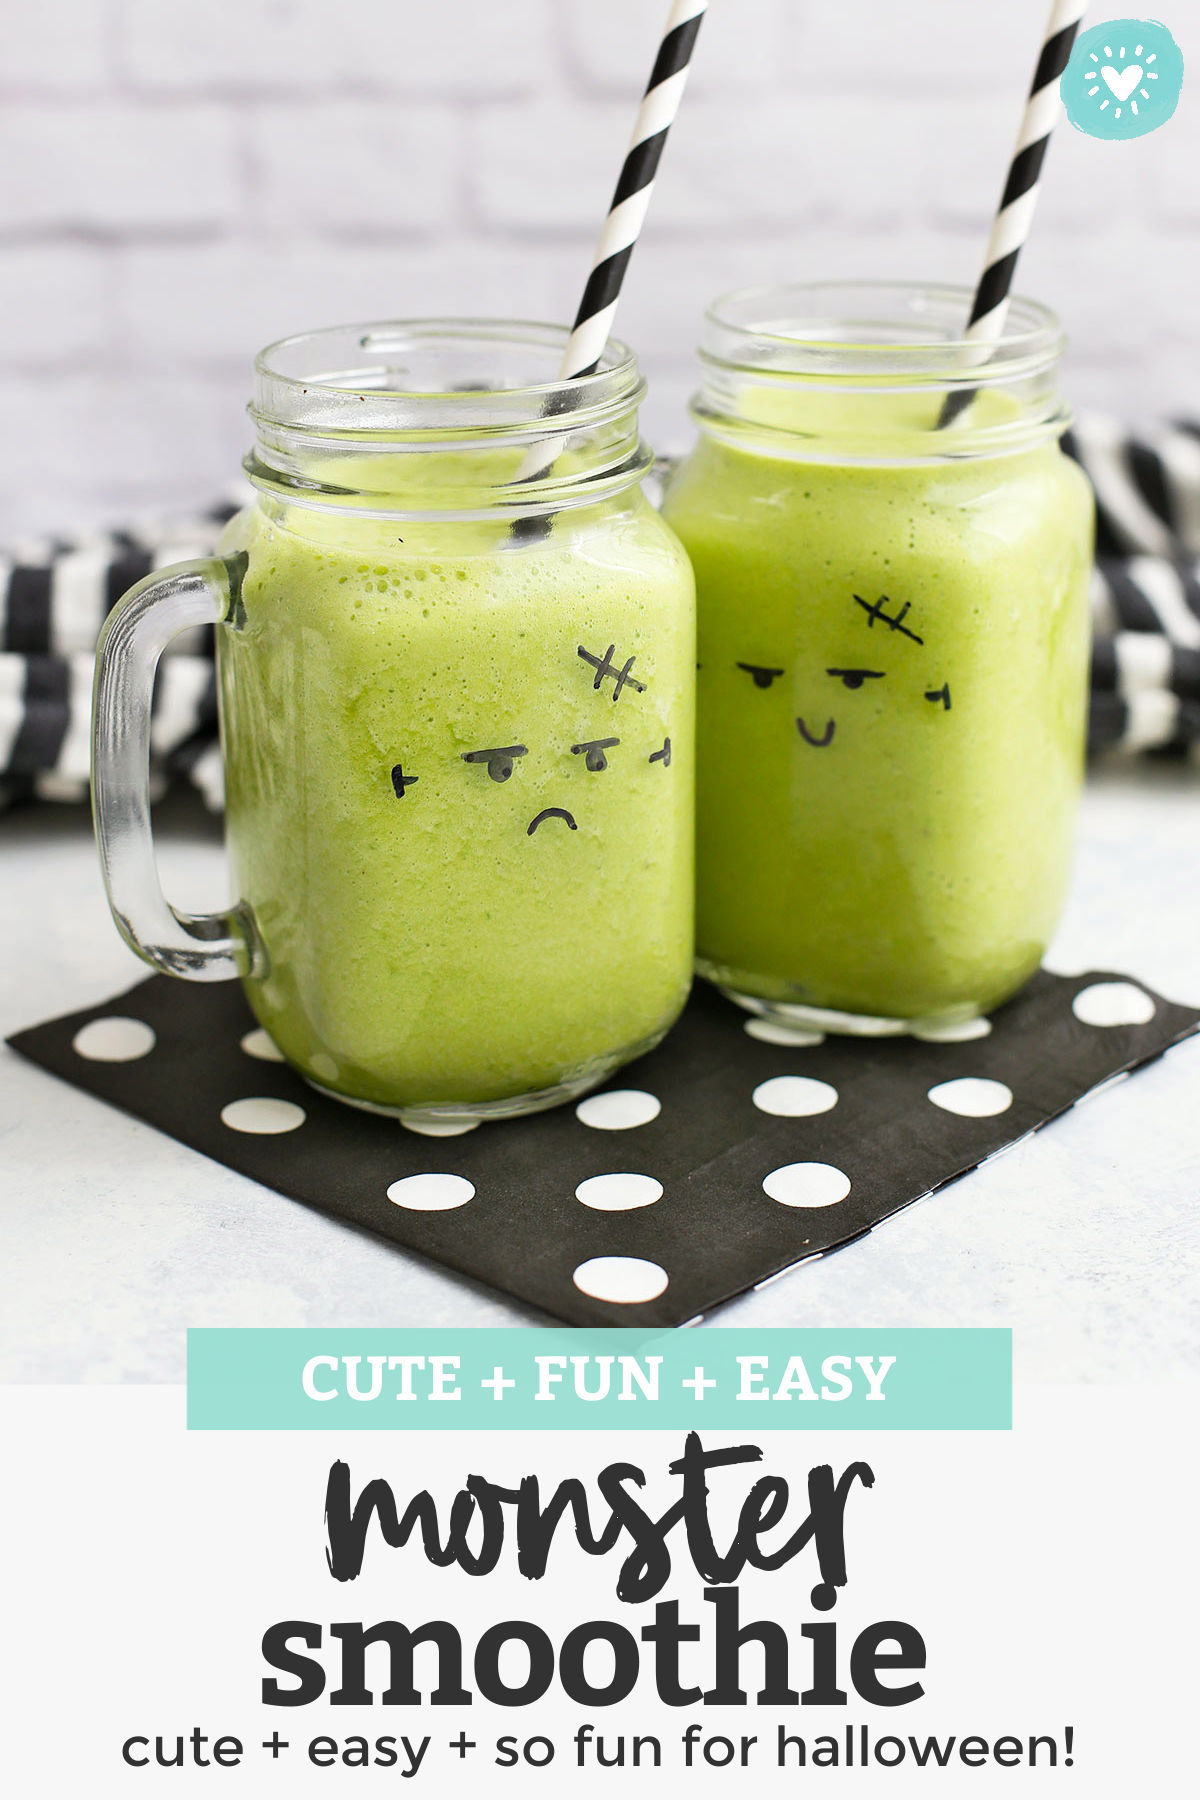 Halloween Monster Smoothies - Learn how to use a marker to make adorable monster smoothies on your smoothie cups. The perfect Halloween breakfast or healthy Hallowen snack! // Halloween ideas for kids // green monster smoothie // halloween party food